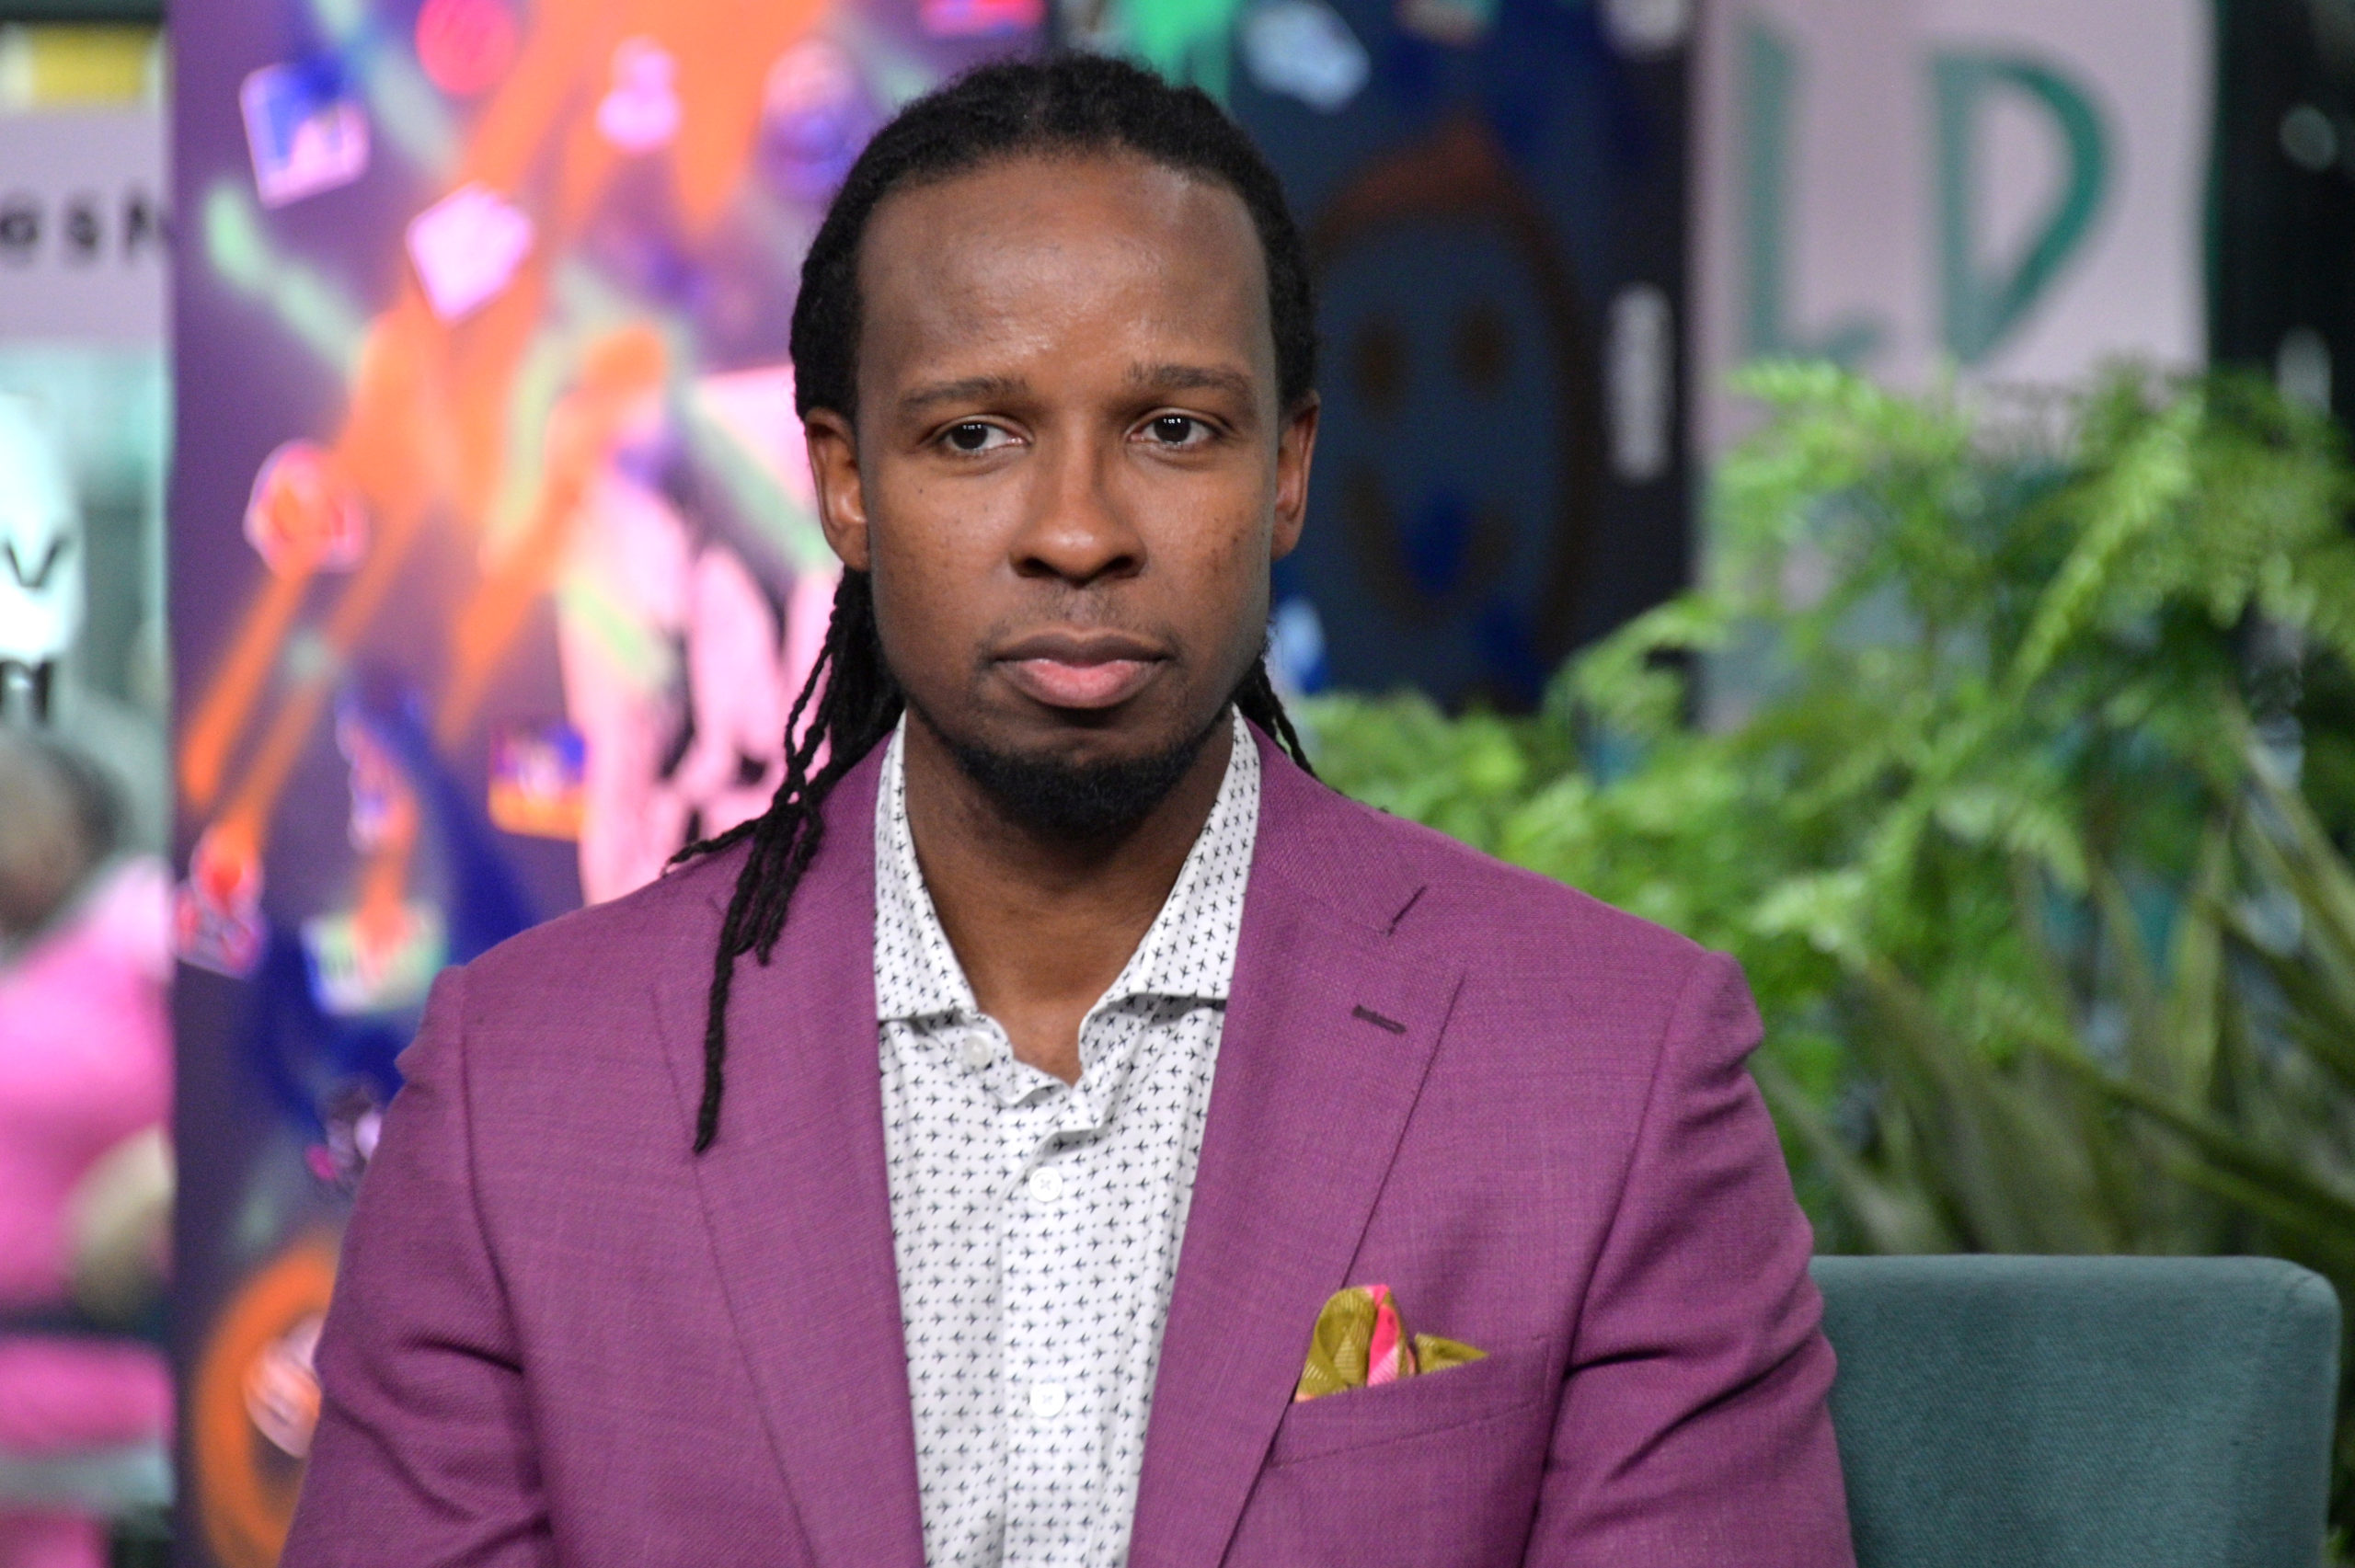  Ibram X. Kendi visits Build to discuss the book Stamped: Racism, Antiracism and You at Build Studio on March 10, 2020 in New York City. (Photo by Michael Loccisano/Getty Images)